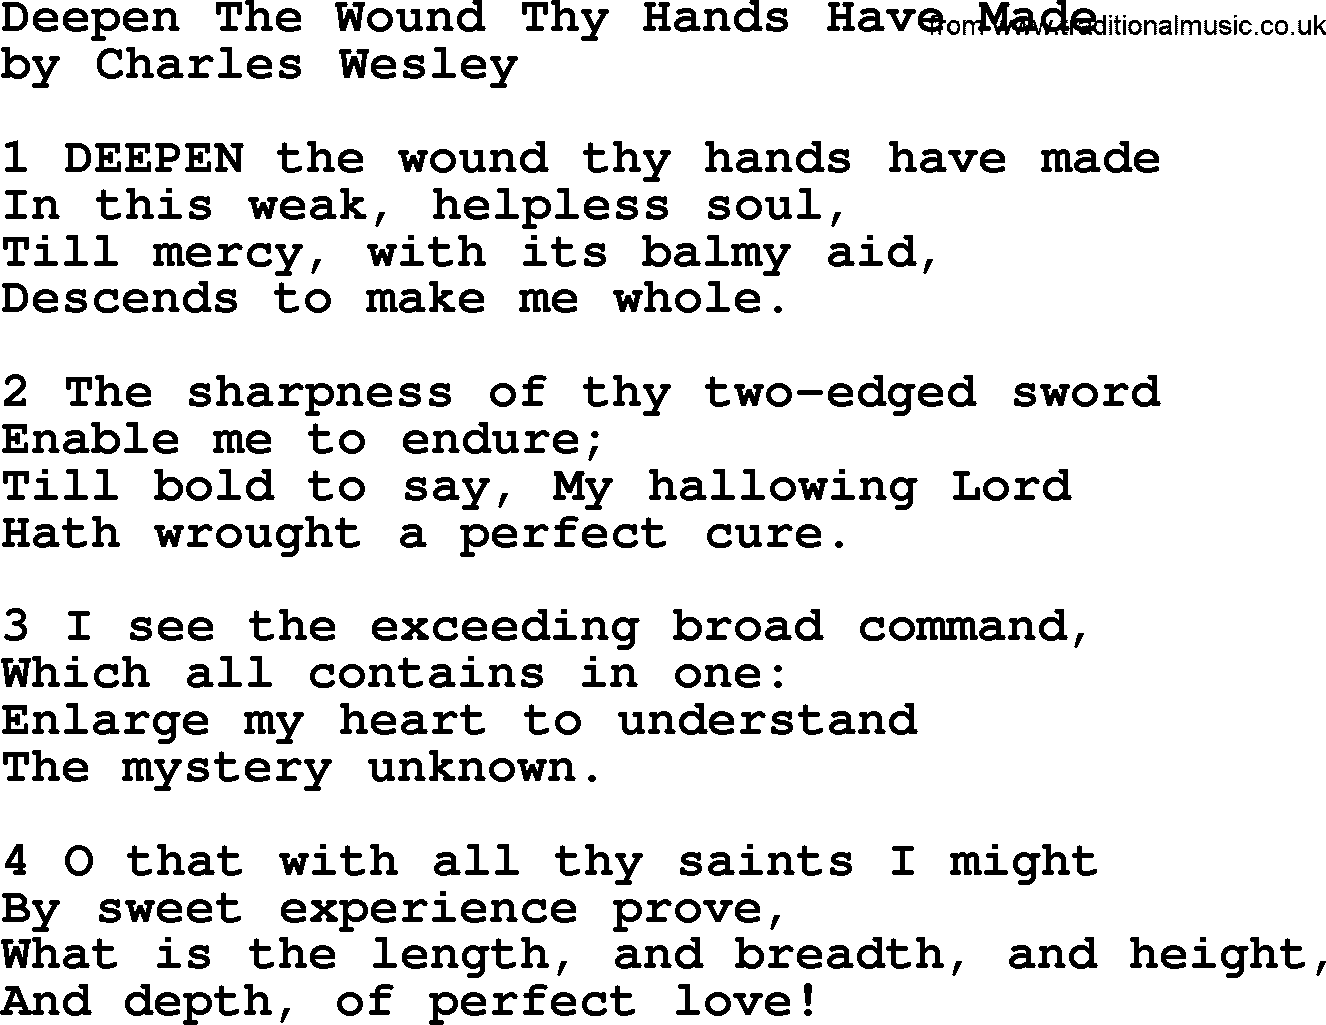 Charles Wesley hymn: Deepen The Wound Thy Hands Have Made, lyrics